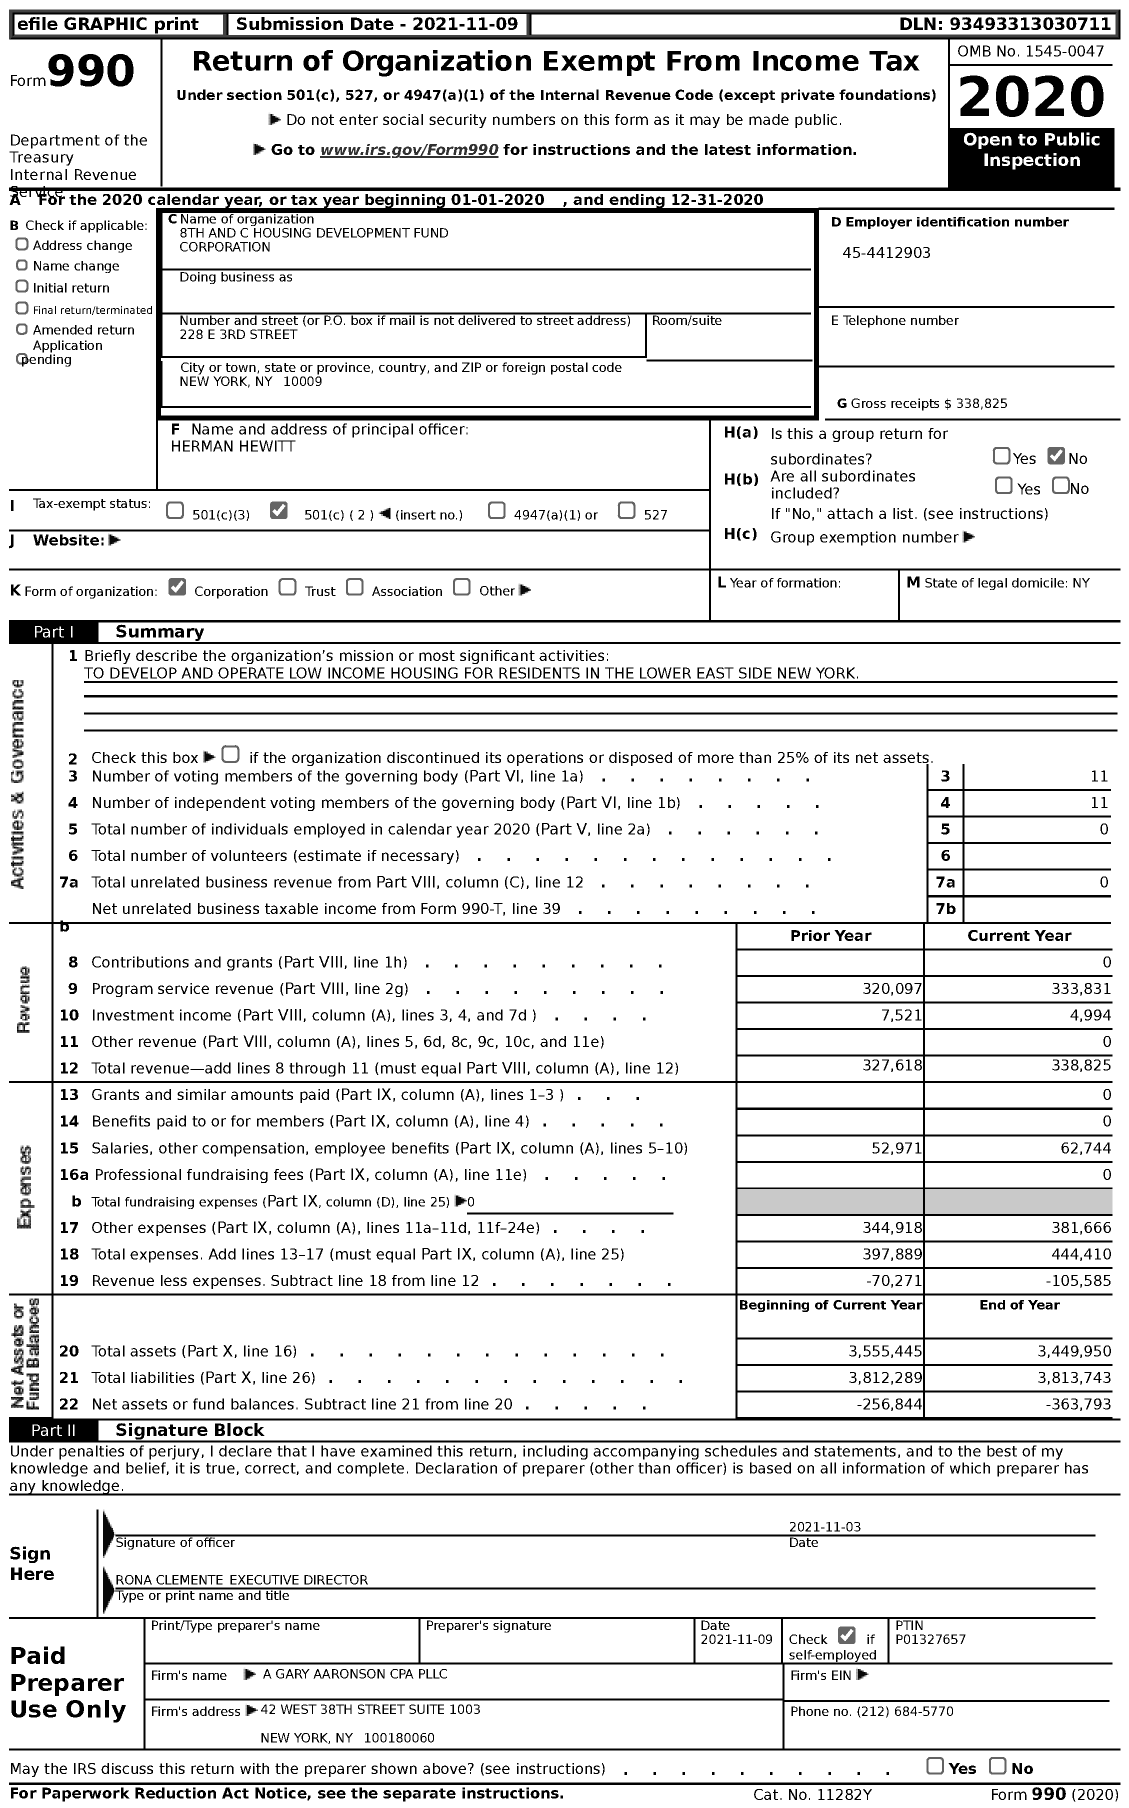 Image of first page of 2020 Form 990 for 8th and C Housing Development Fund Corporation